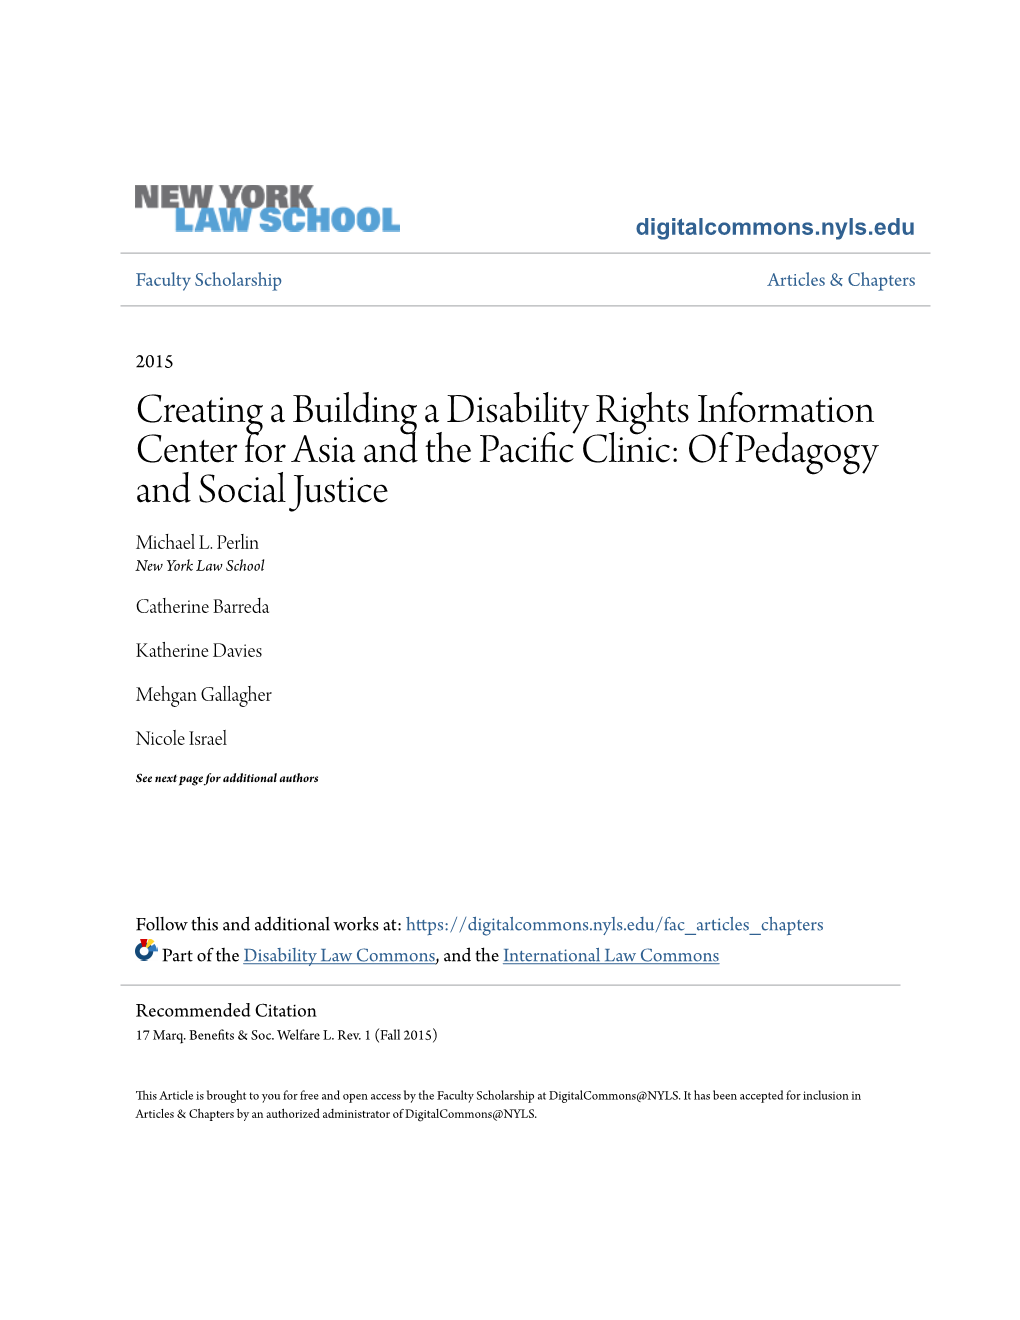 Creating a Building a Disability Rights Information Center for Asia and the Pacific Linic:C of Pedagogy and Social Justice Michael L